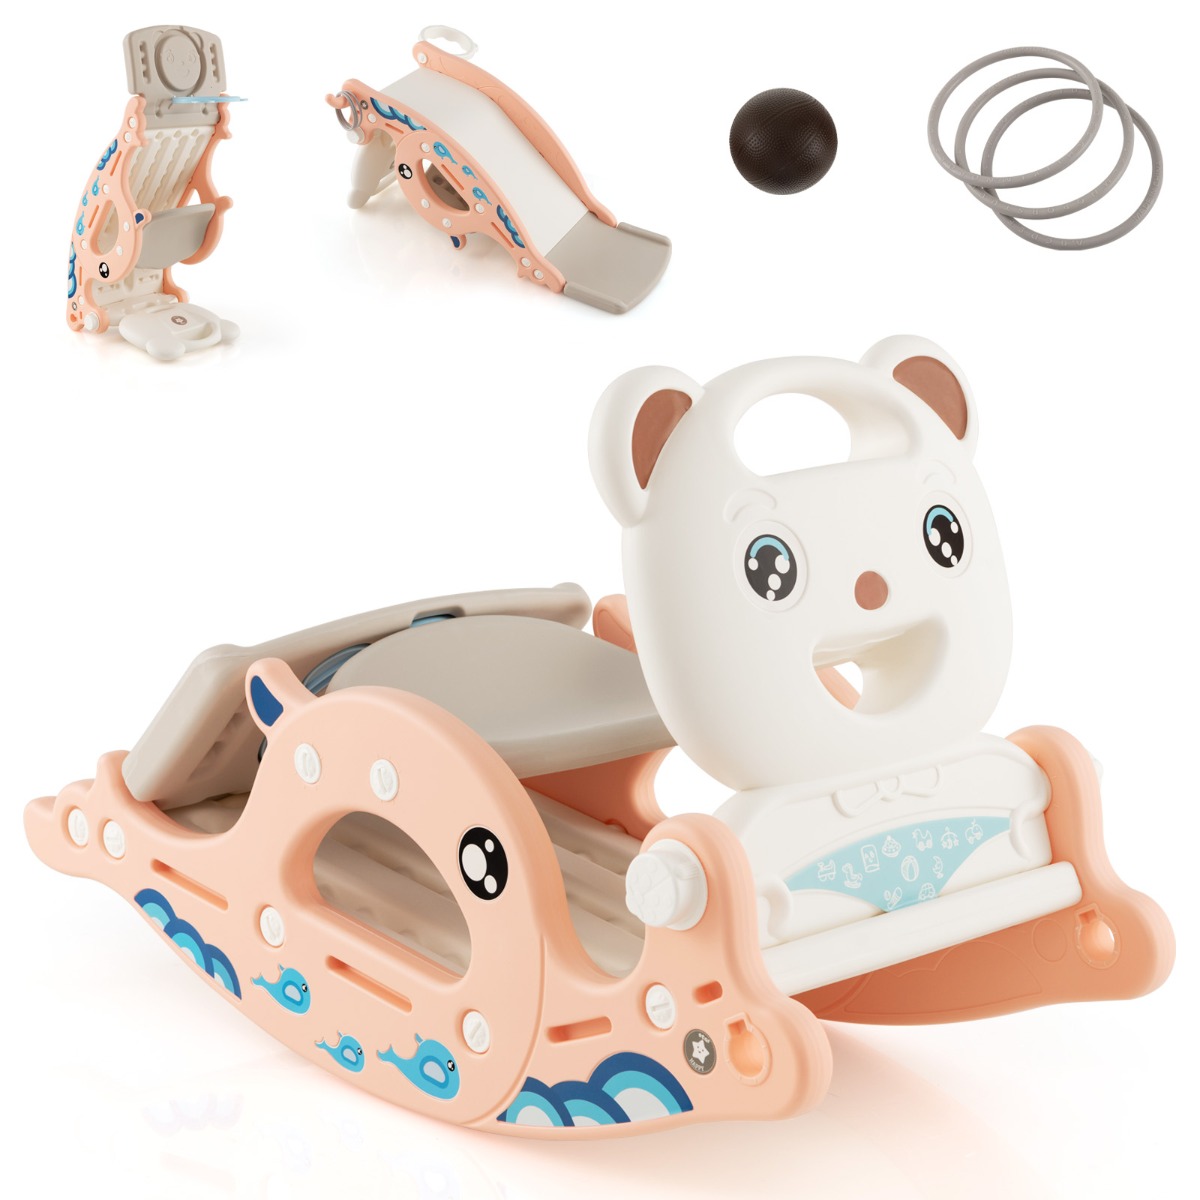 4-in-1 Kids Slide Rocking Horse with Basketball & Ring Toss for Kids 1-4 Years Old-Pink